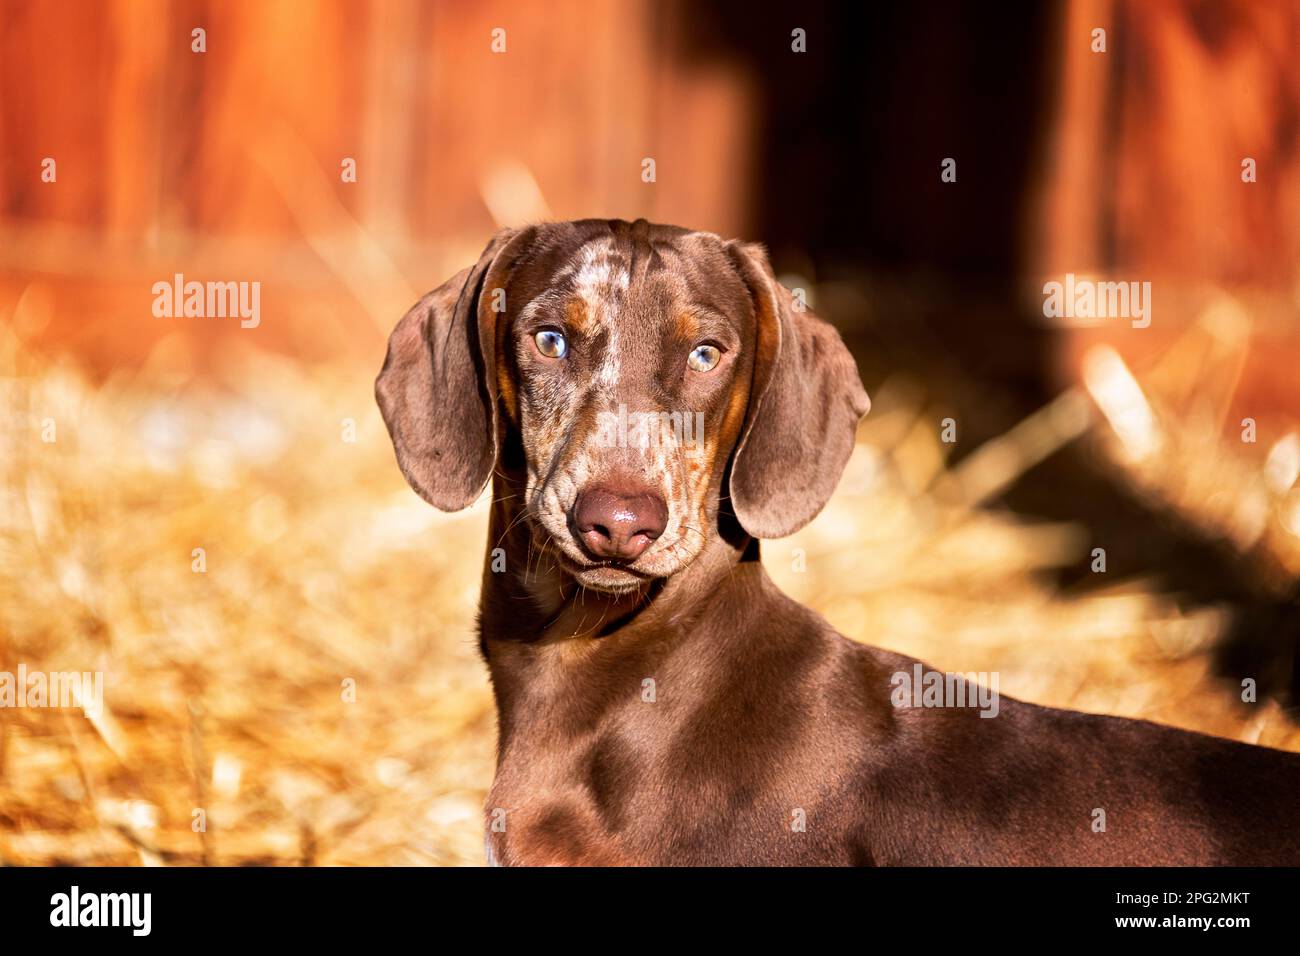 Short-haired brindle Dachshund. Portrait of adult male. Germany Stock Photo